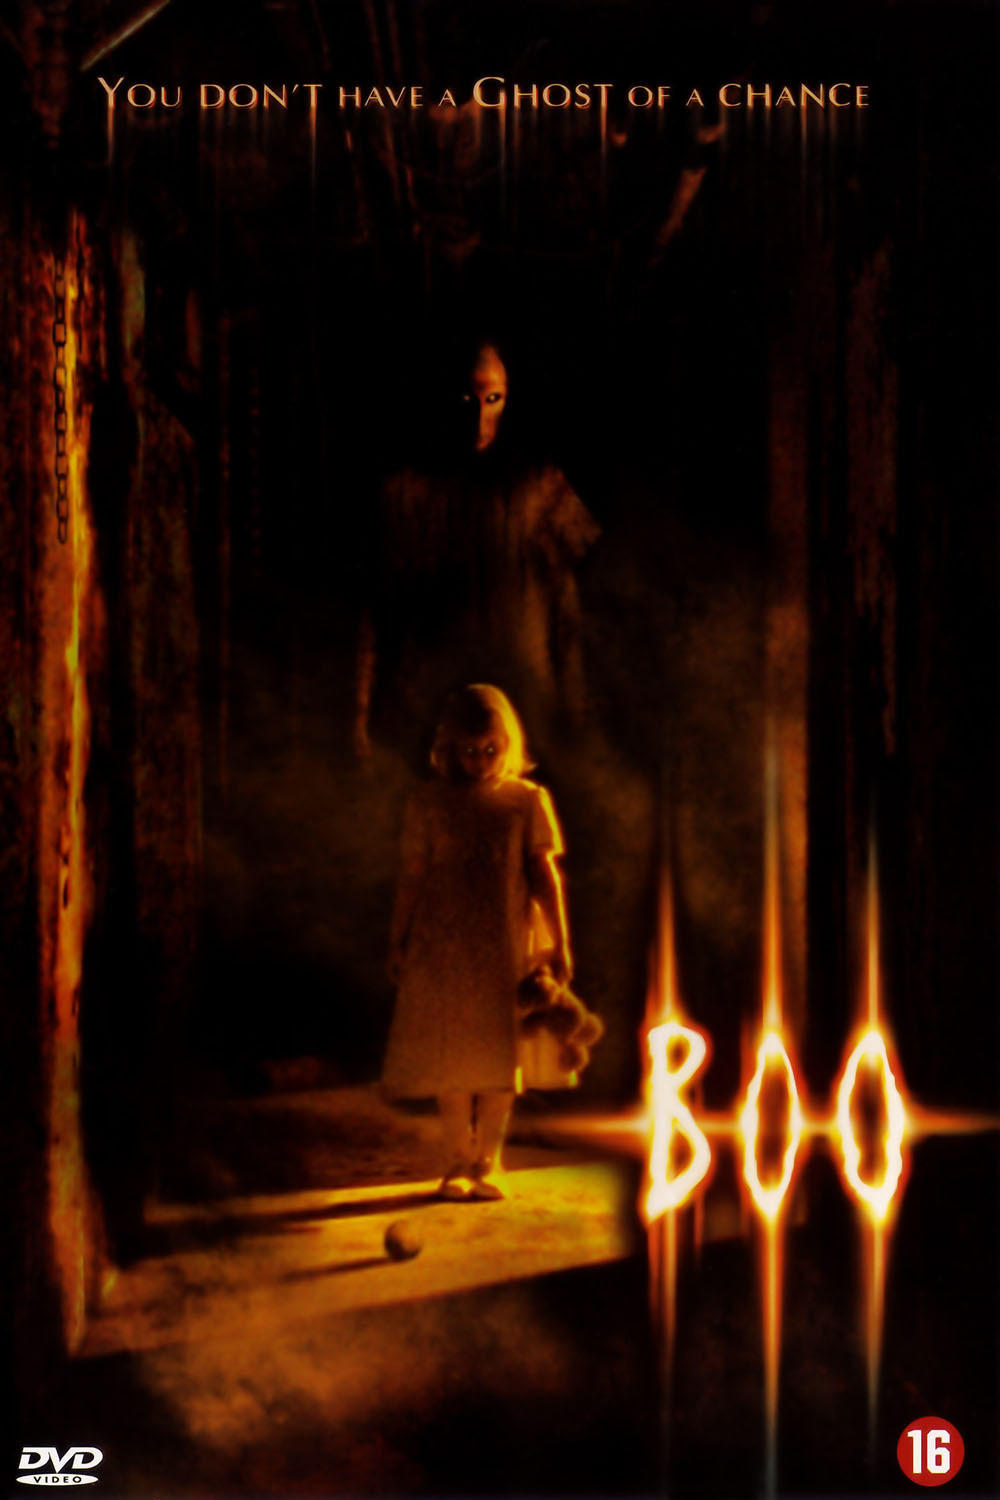 Poster for the movie "Boo"